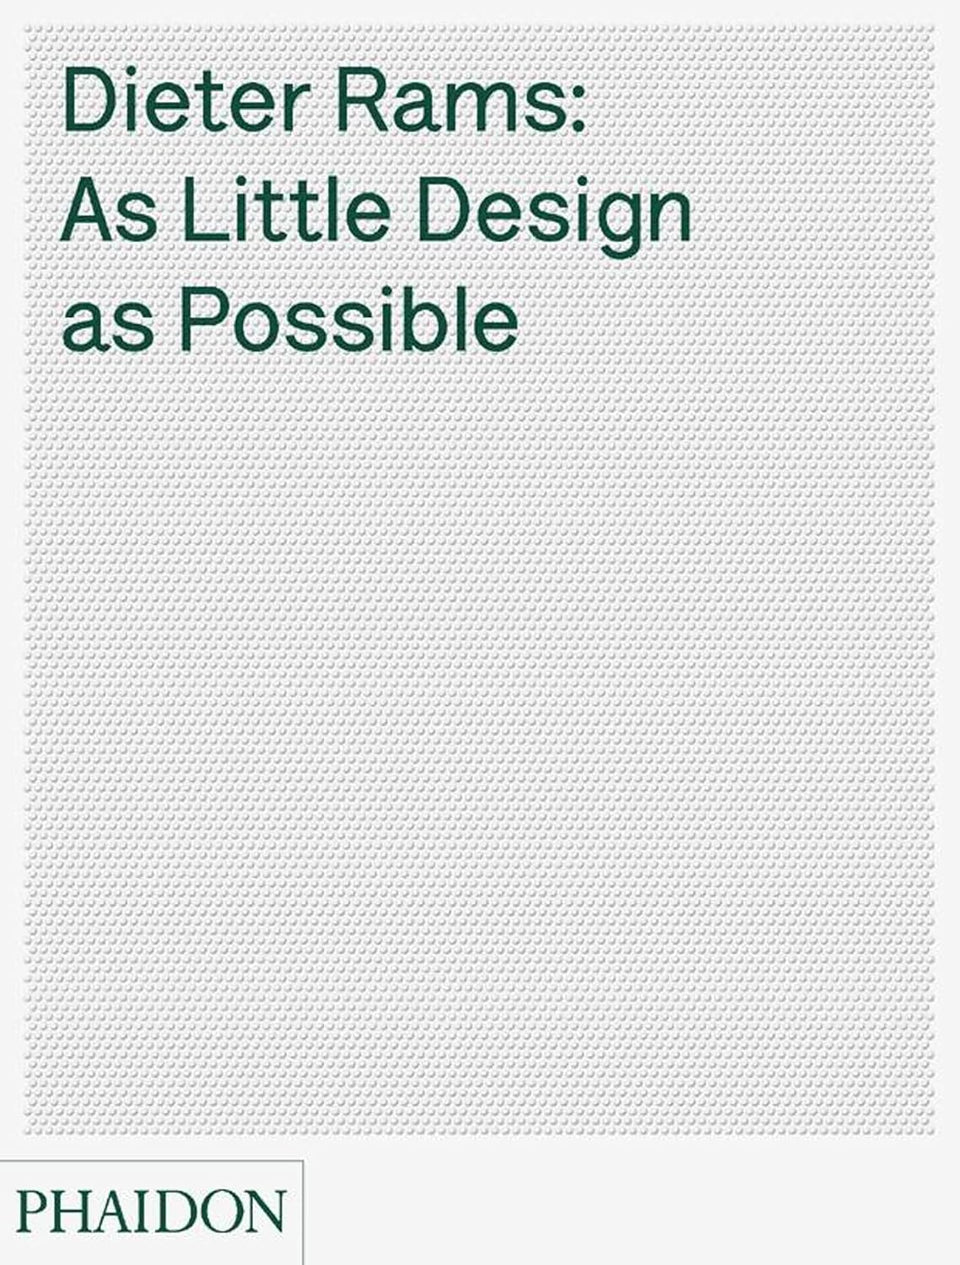 Dieter Rams: As Little Design As Possible - 81sARb8CBlL._SL1500